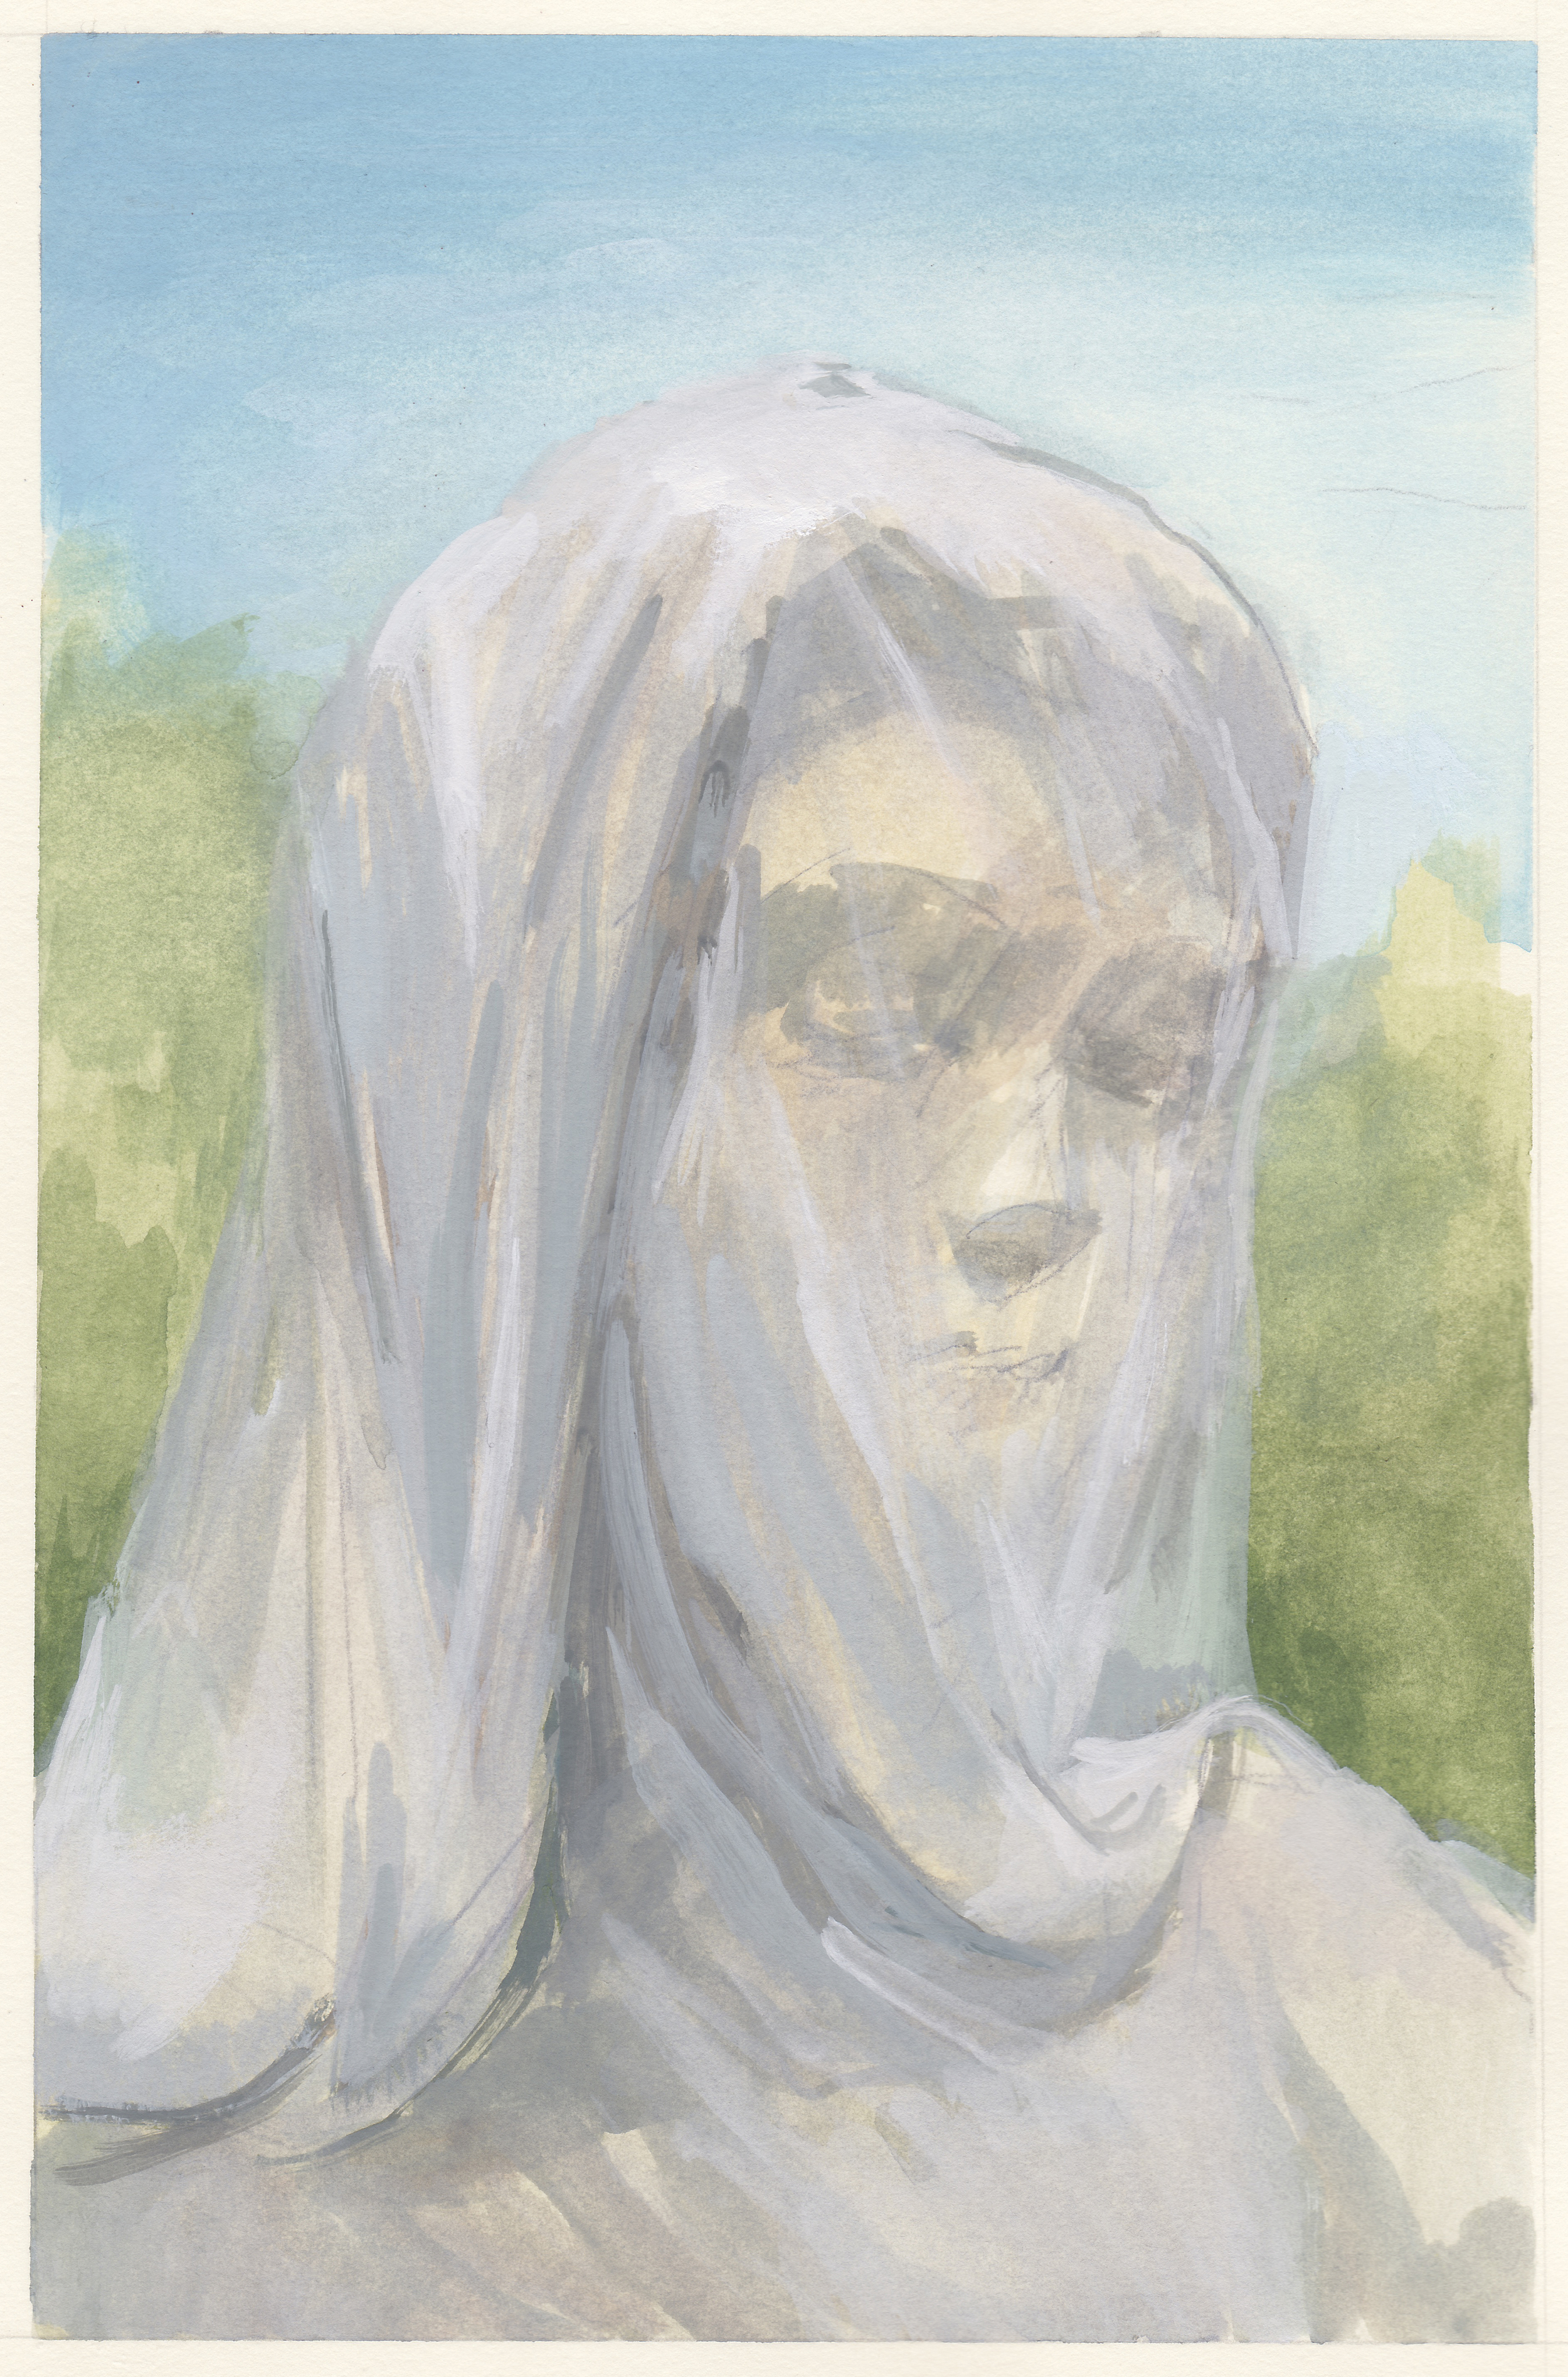    veiled woman     watercolor and gouache on paper 6x9.25" 2015   purchase  